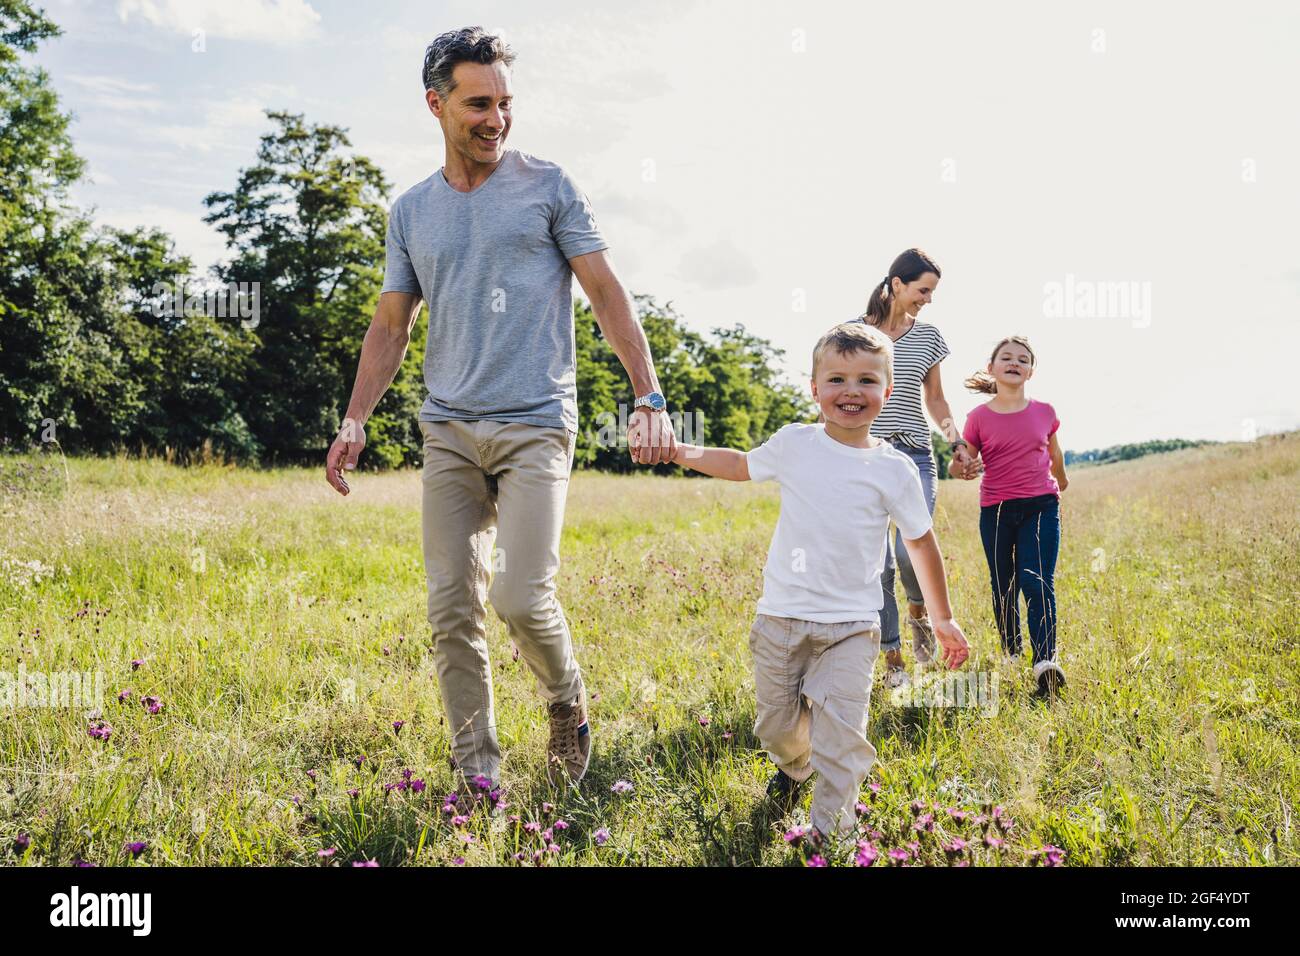 Parents holding hands of children while walking on grass Stock Photo